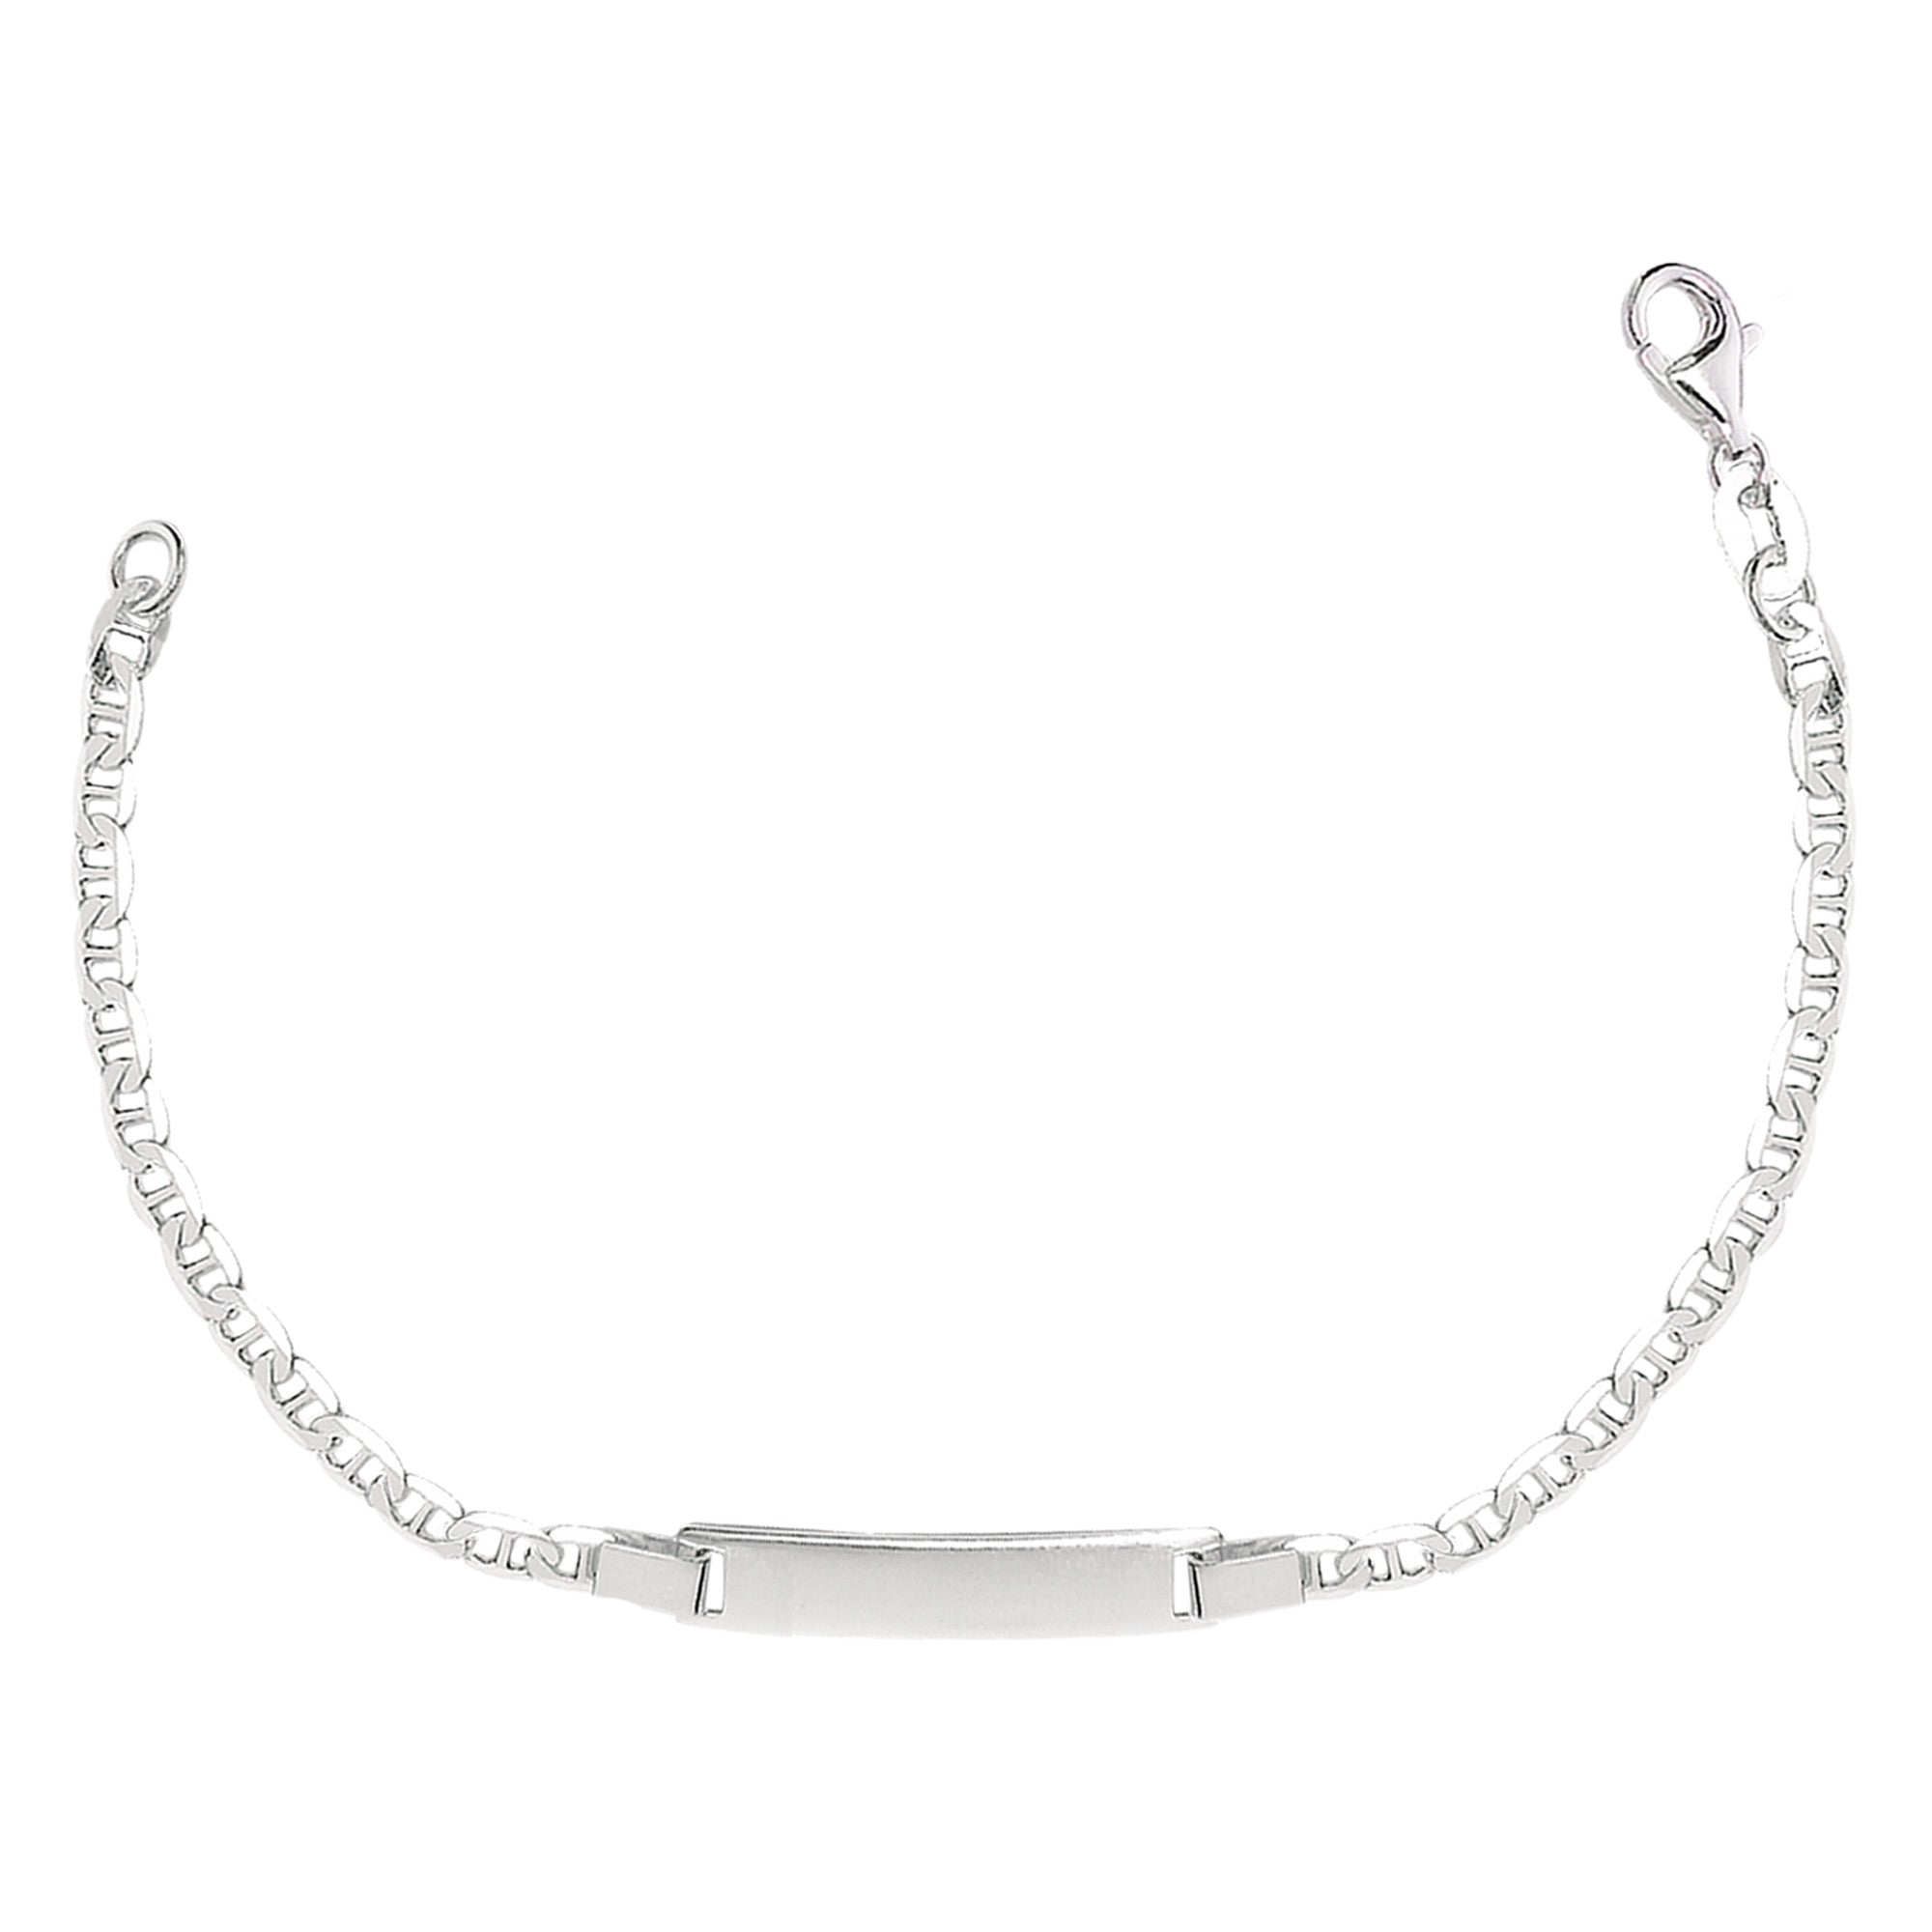 Mariner Chain Baby Id Bracelet In Sterling Silver - 6 Inches fine designer jewelry for men and women